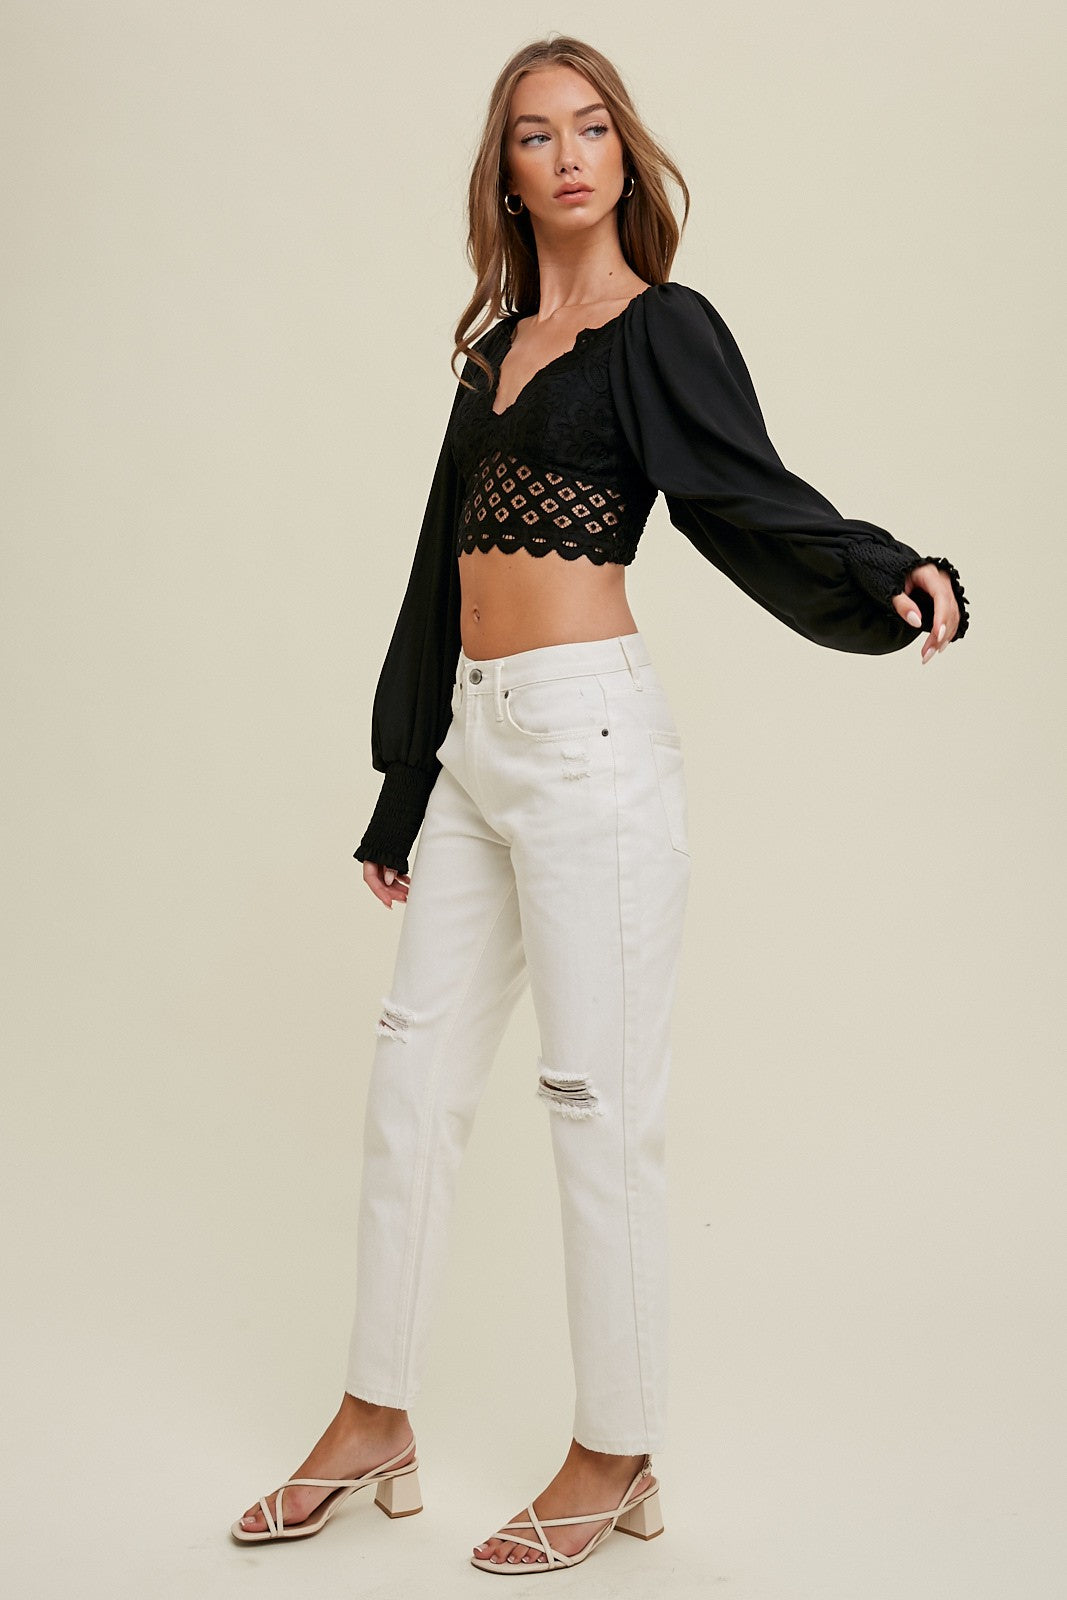 Kasey Lace Top